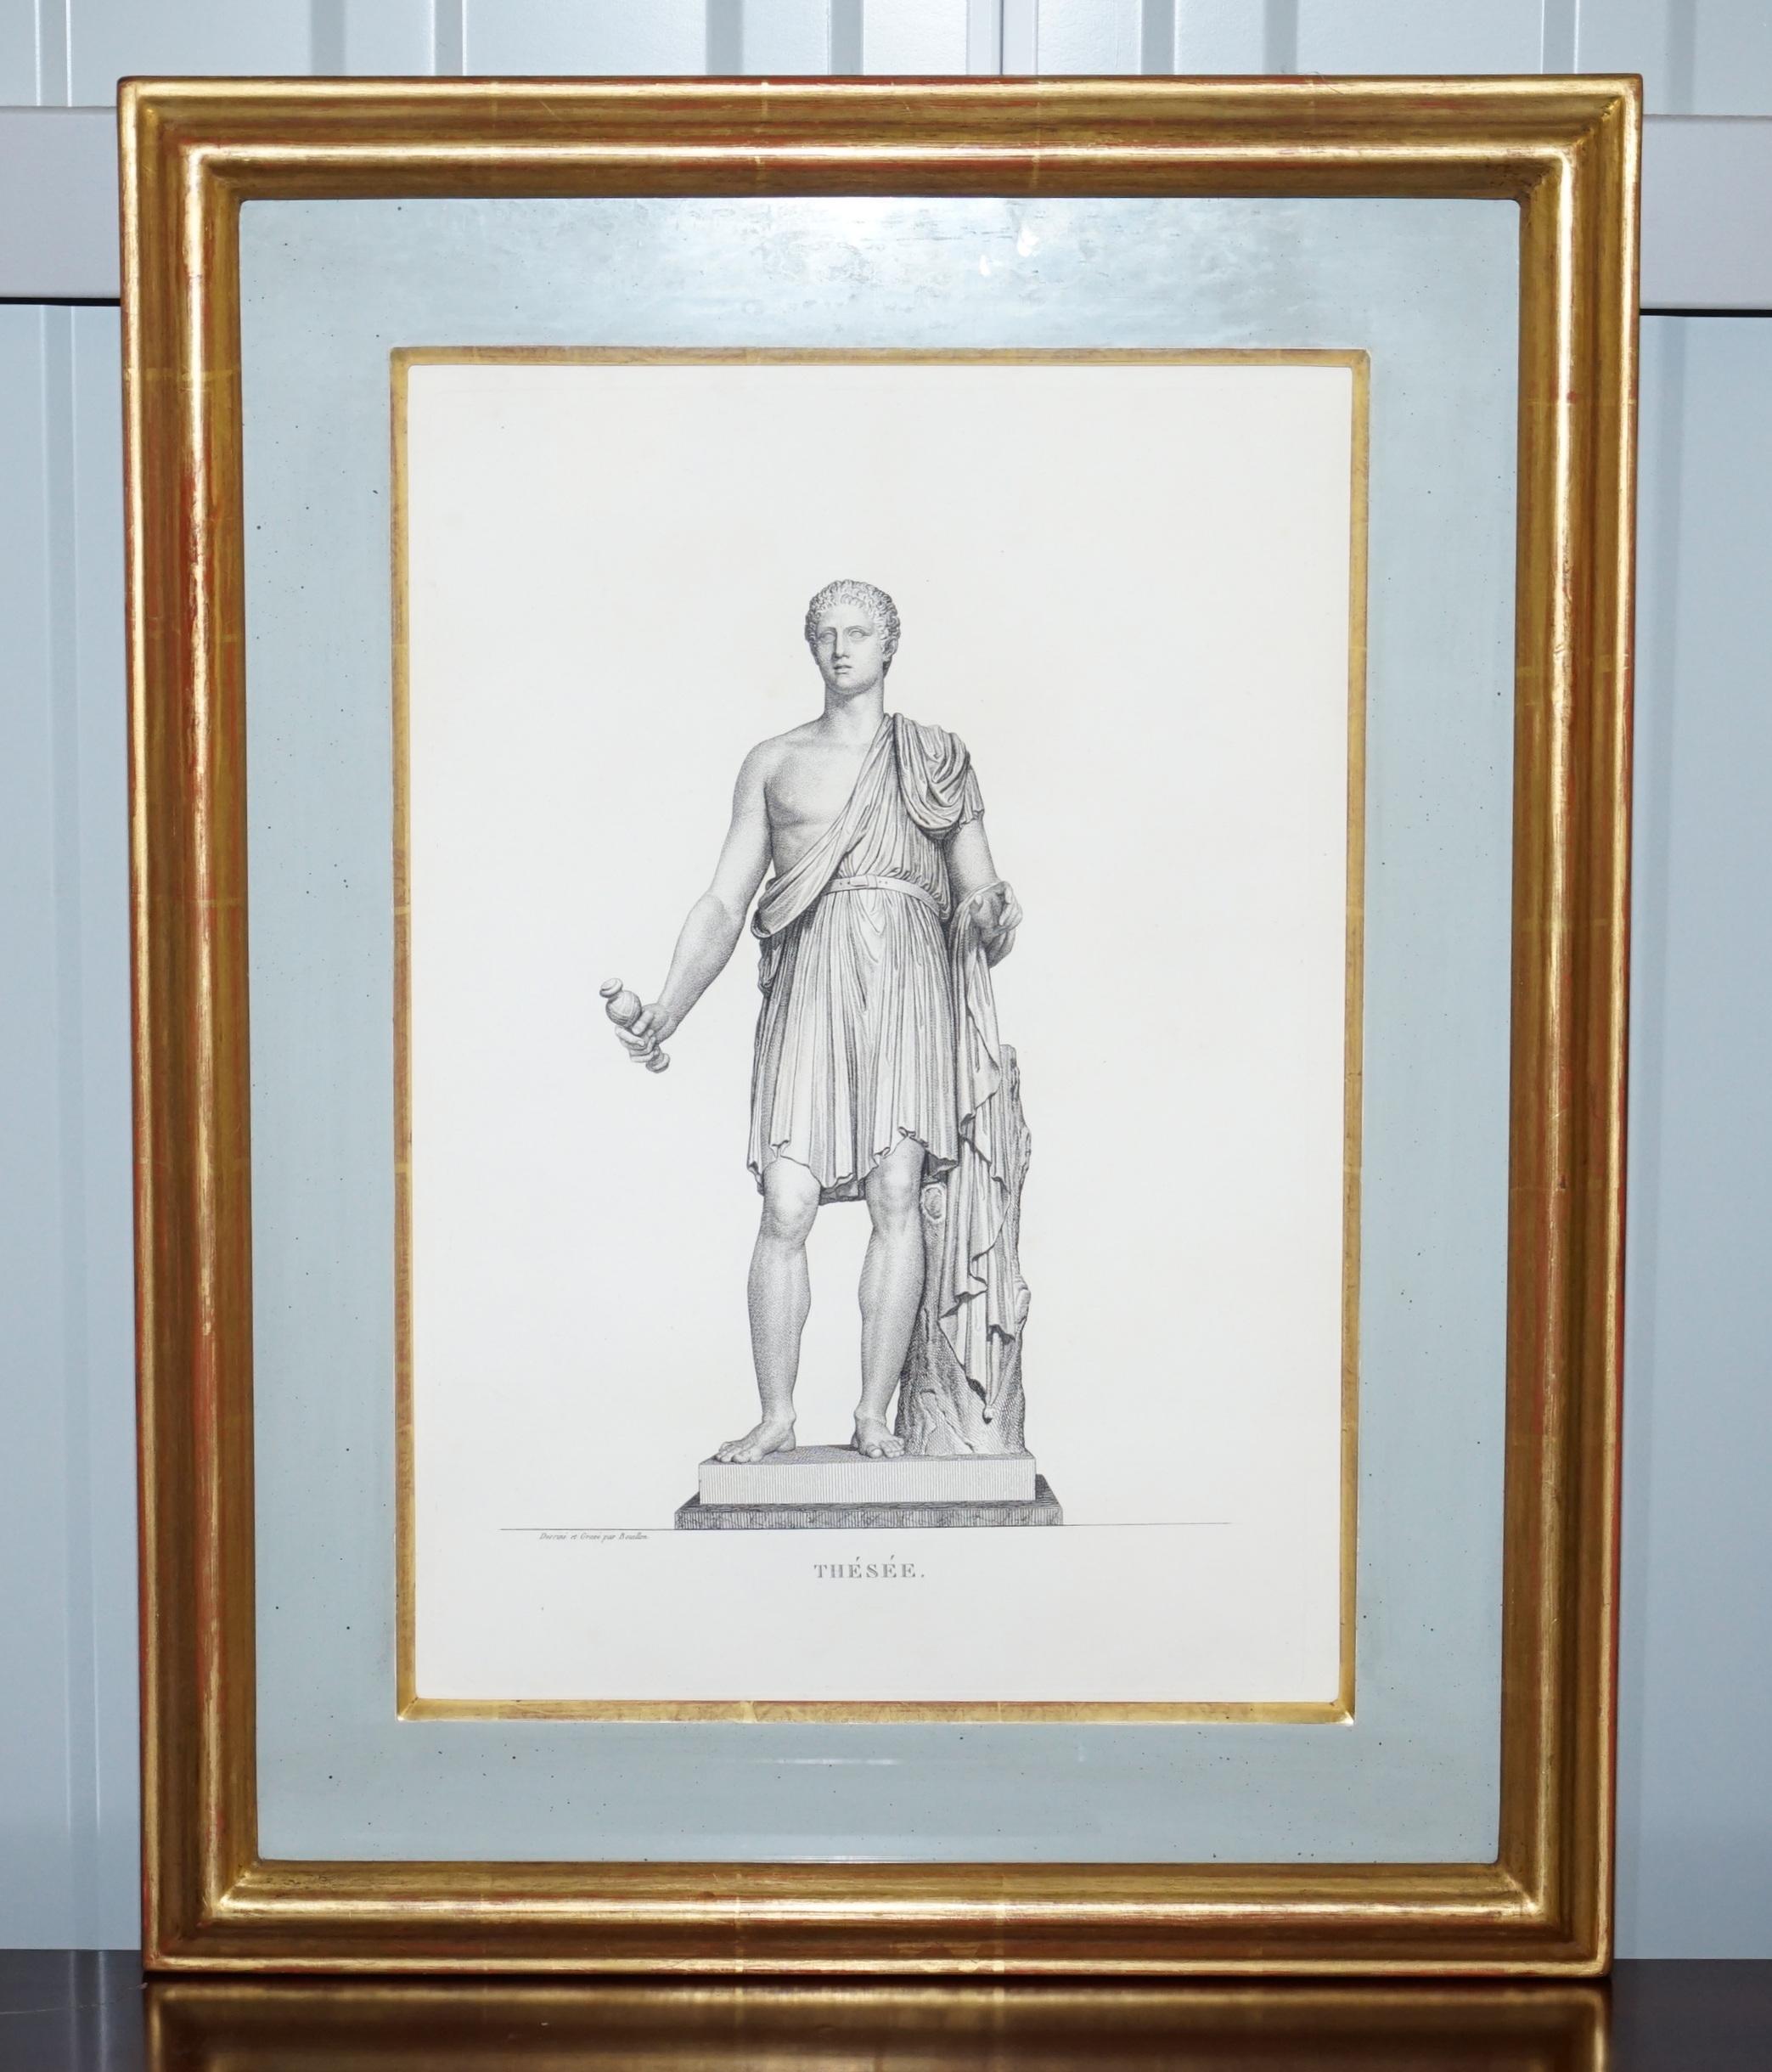 We are delighted to offer for sale this very rare and highly collectable suite of four original 1800 dated copper plate prints by the genius that was Bouillon

These are sublime quality and look important and expensive in any setting, each piece